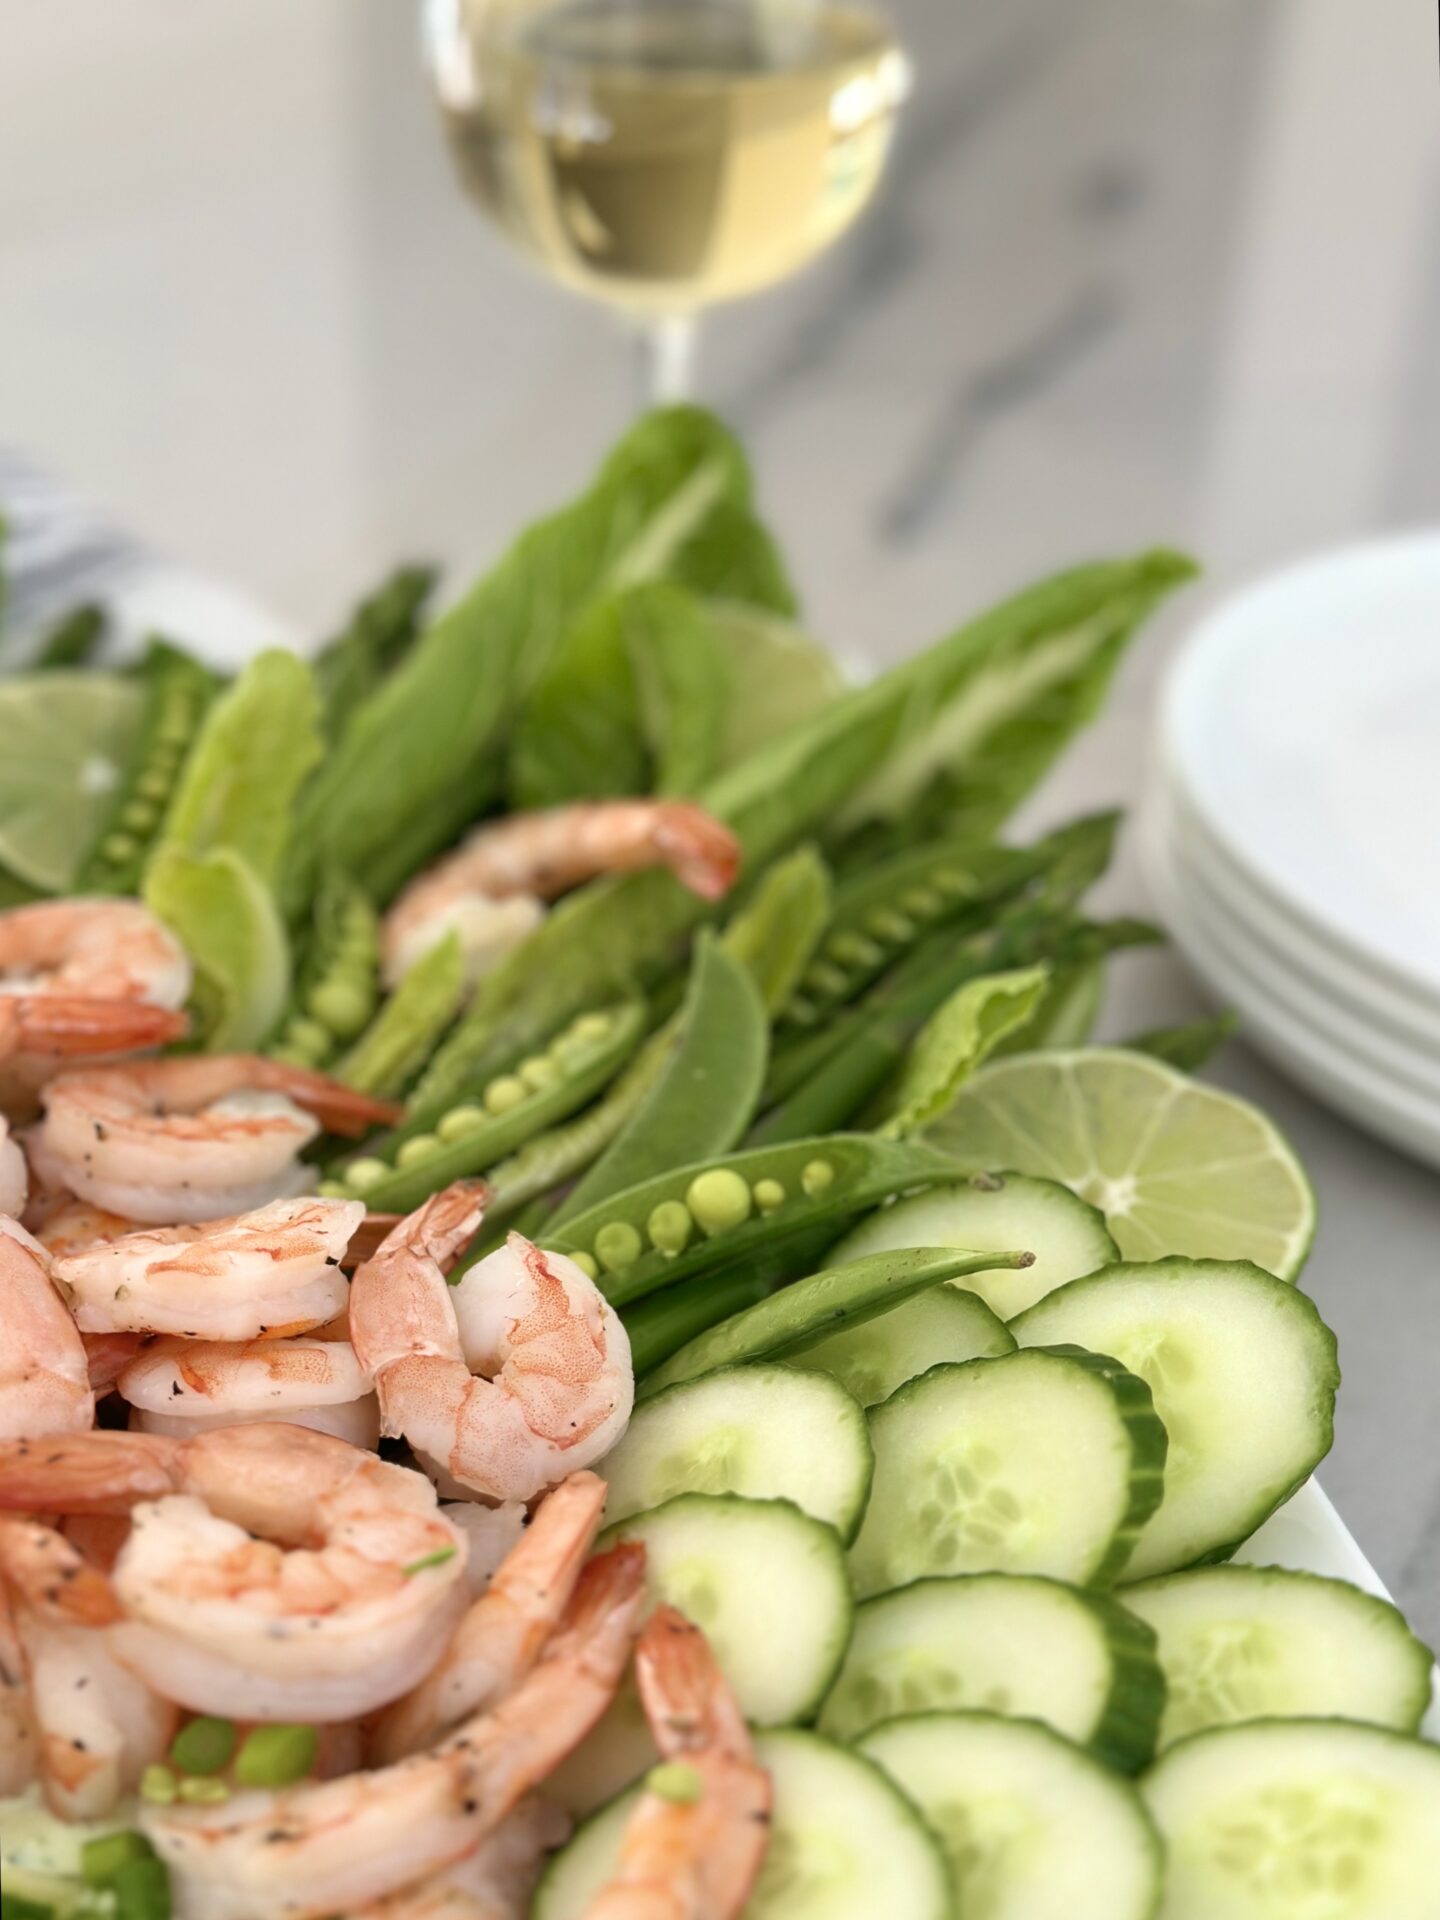 A platter of roasted shrimp and spring vegetables with creamy herb dip is seen with a chilled glass of white wine